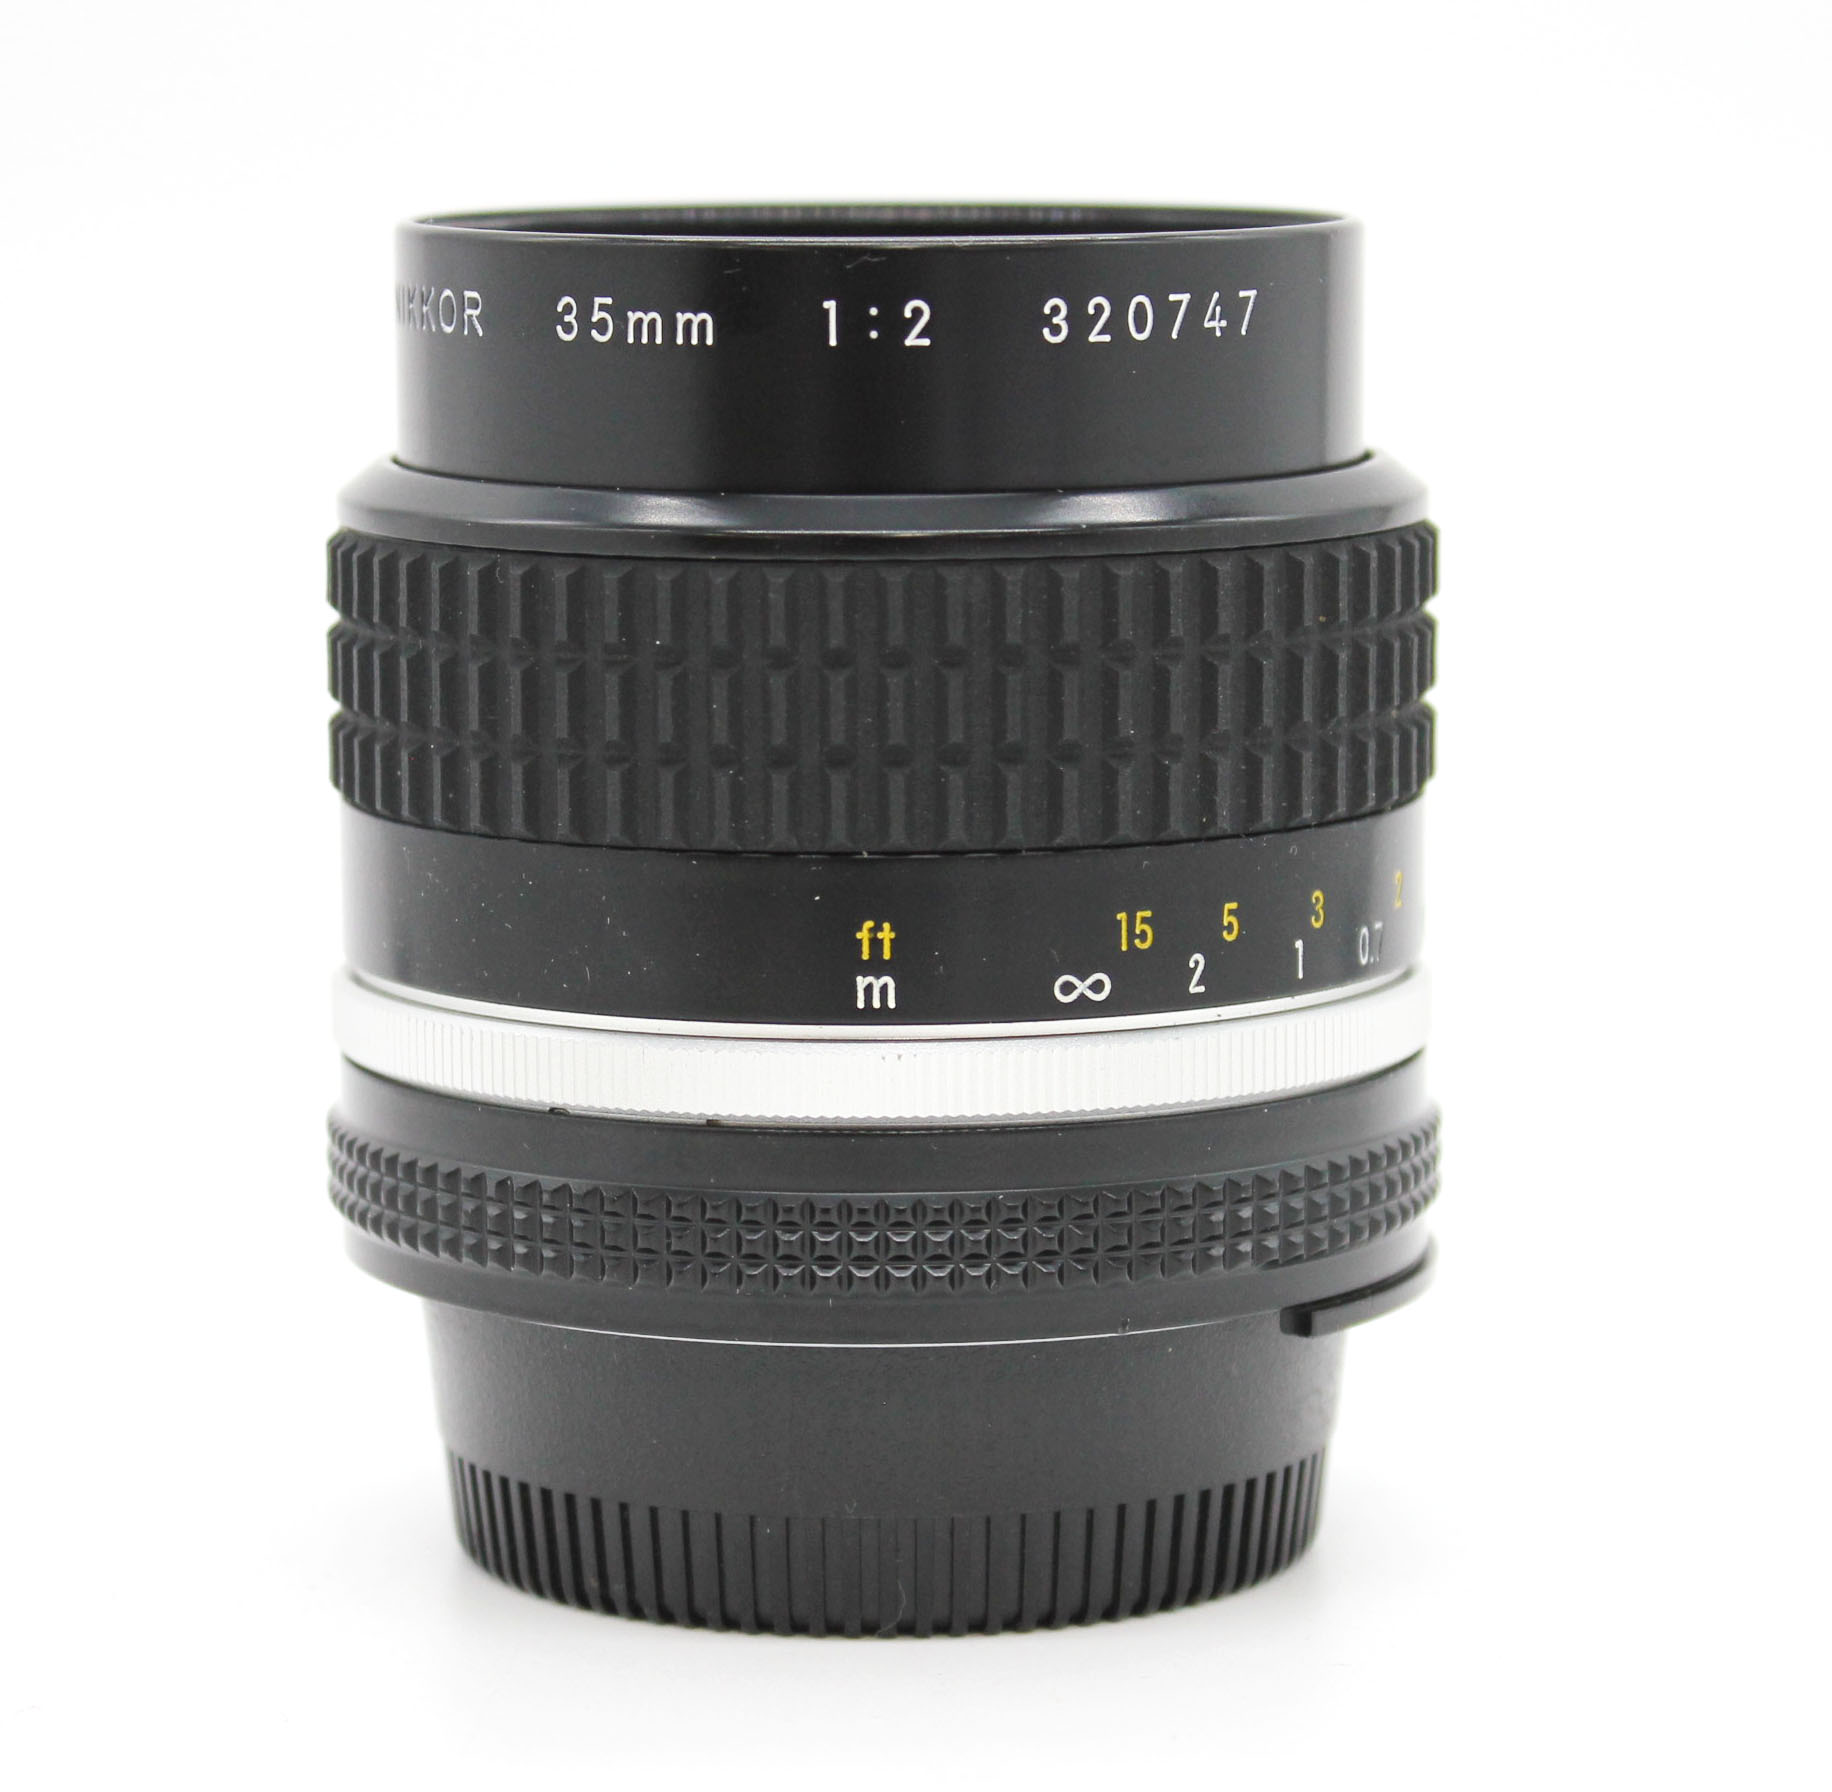 Nikon Ai-s Ais Nikkor 35mm F/2 Wide Angle MF Lens S/N32* SIC Version with Hood HN-3 from Japan Photo 3